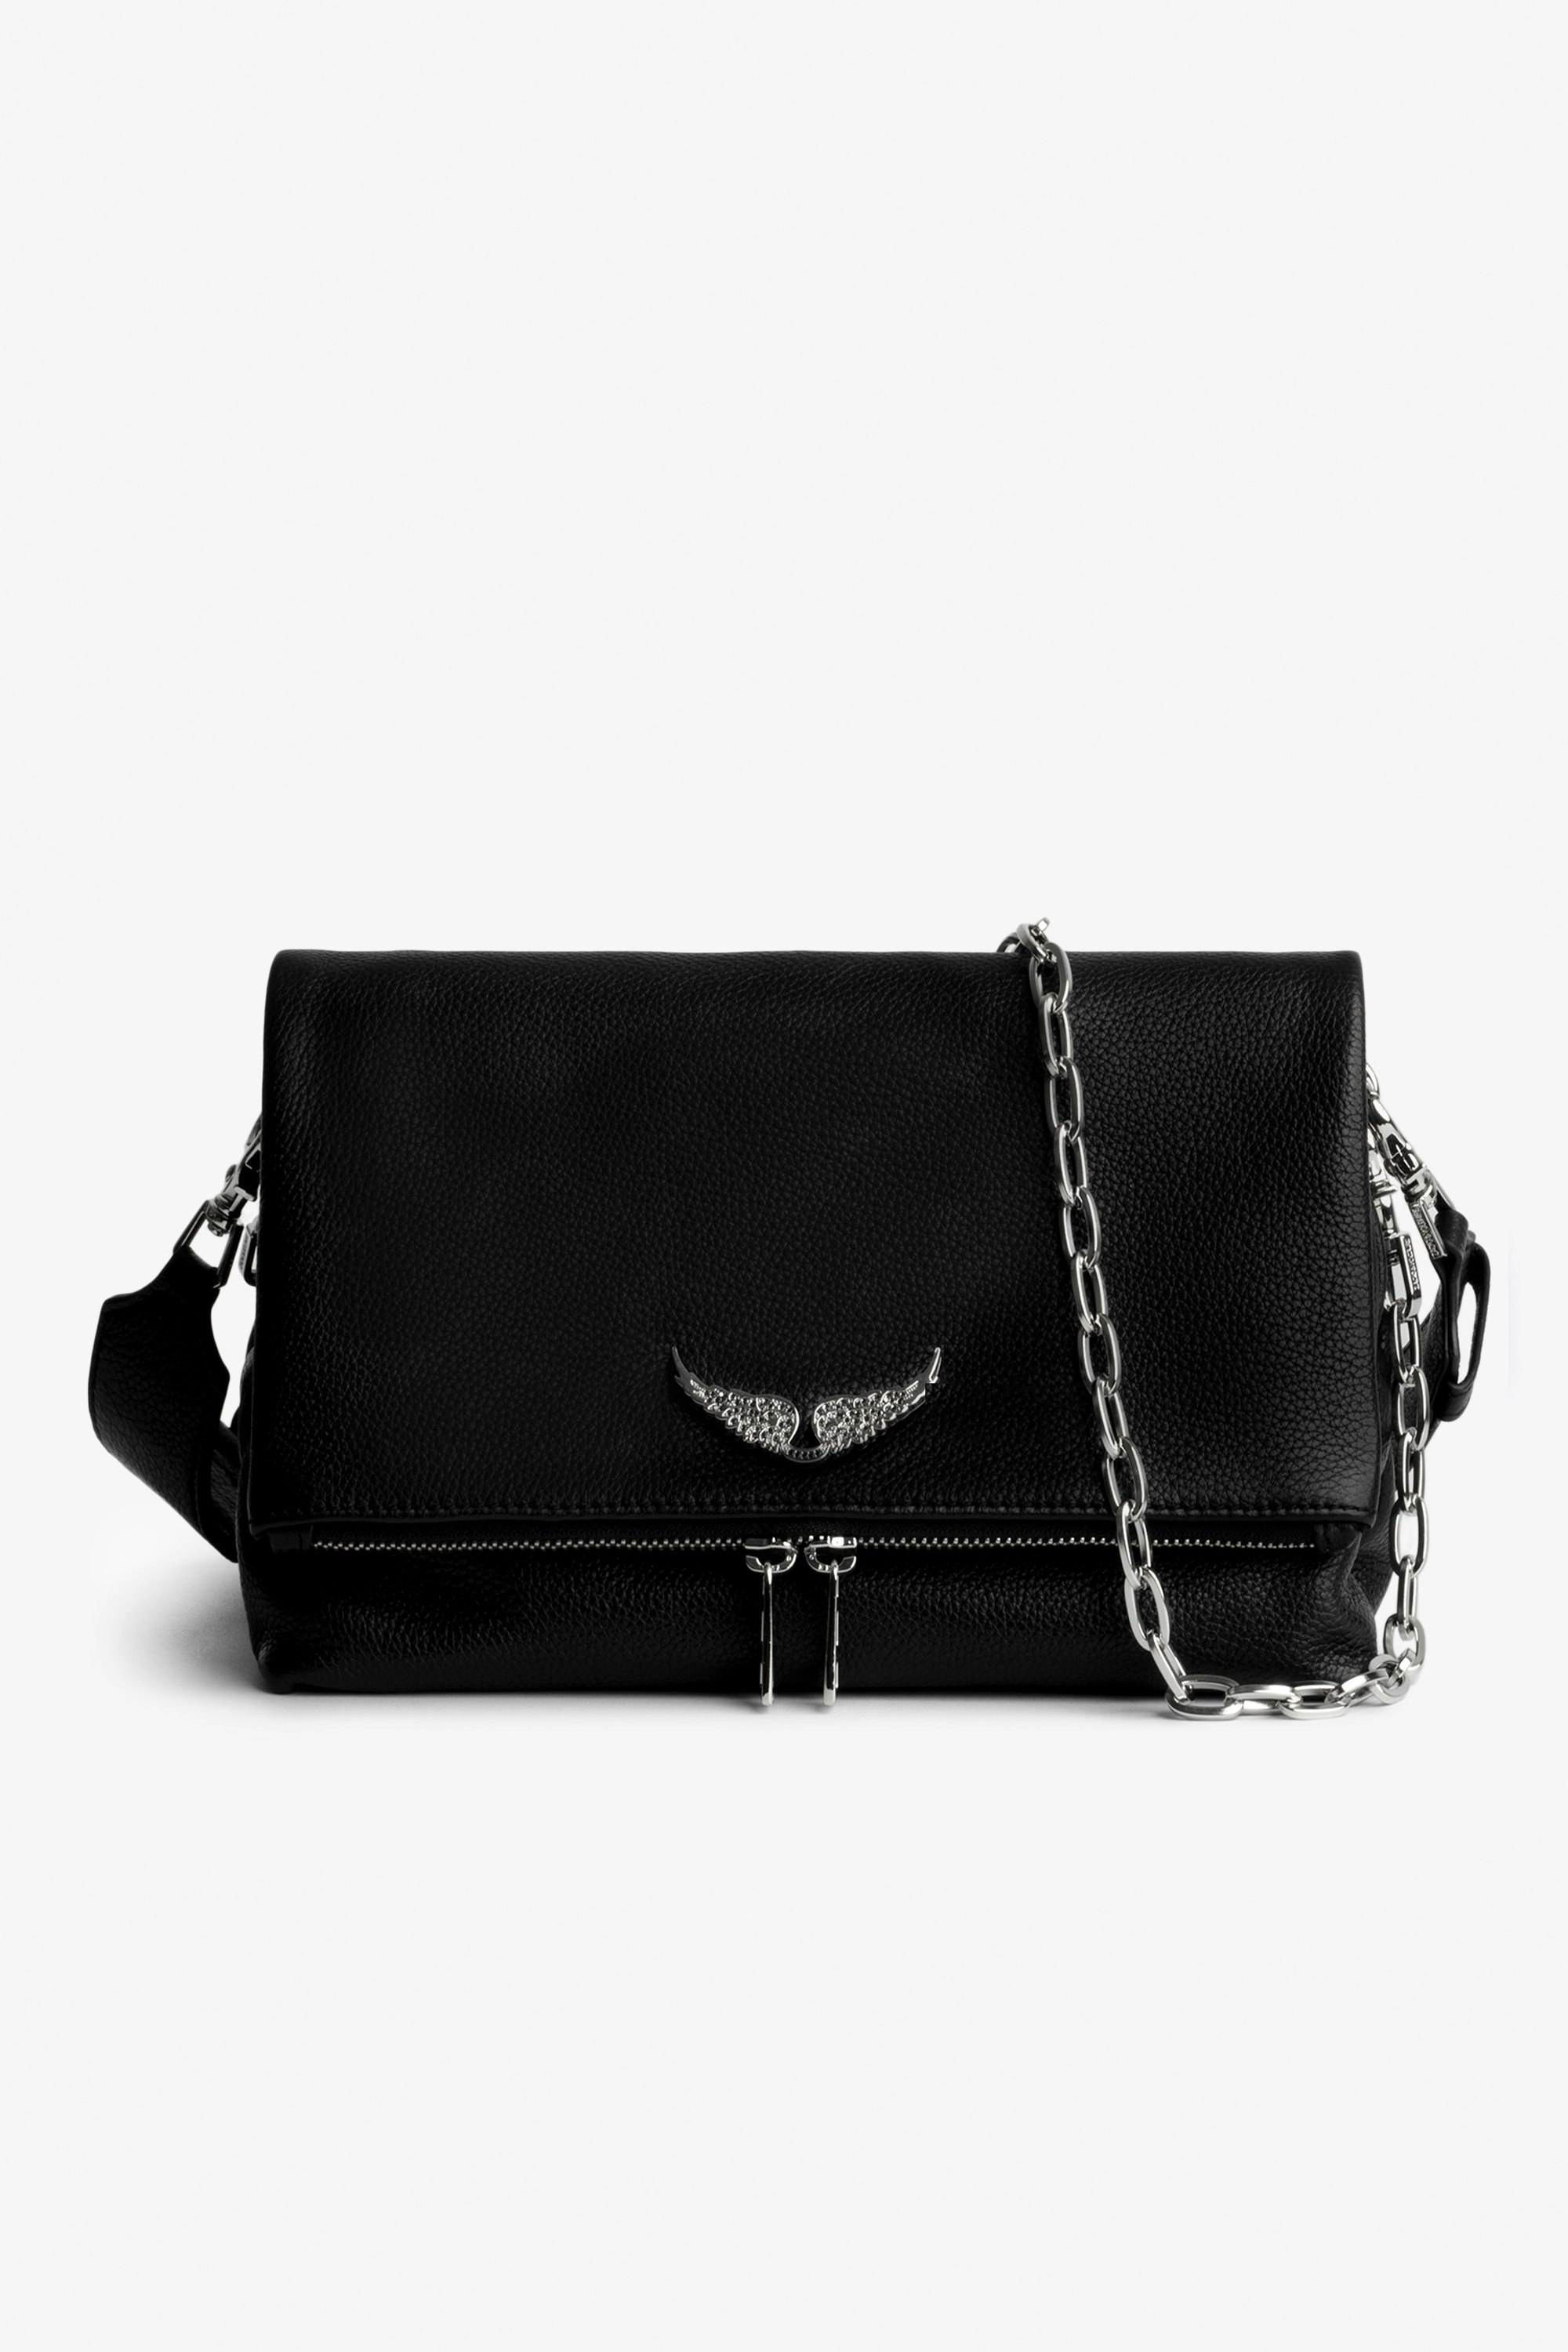 Swing Your Wings Rocky Bag - Women’s black leather Rocky bag with silver-toned metal shoulder strap